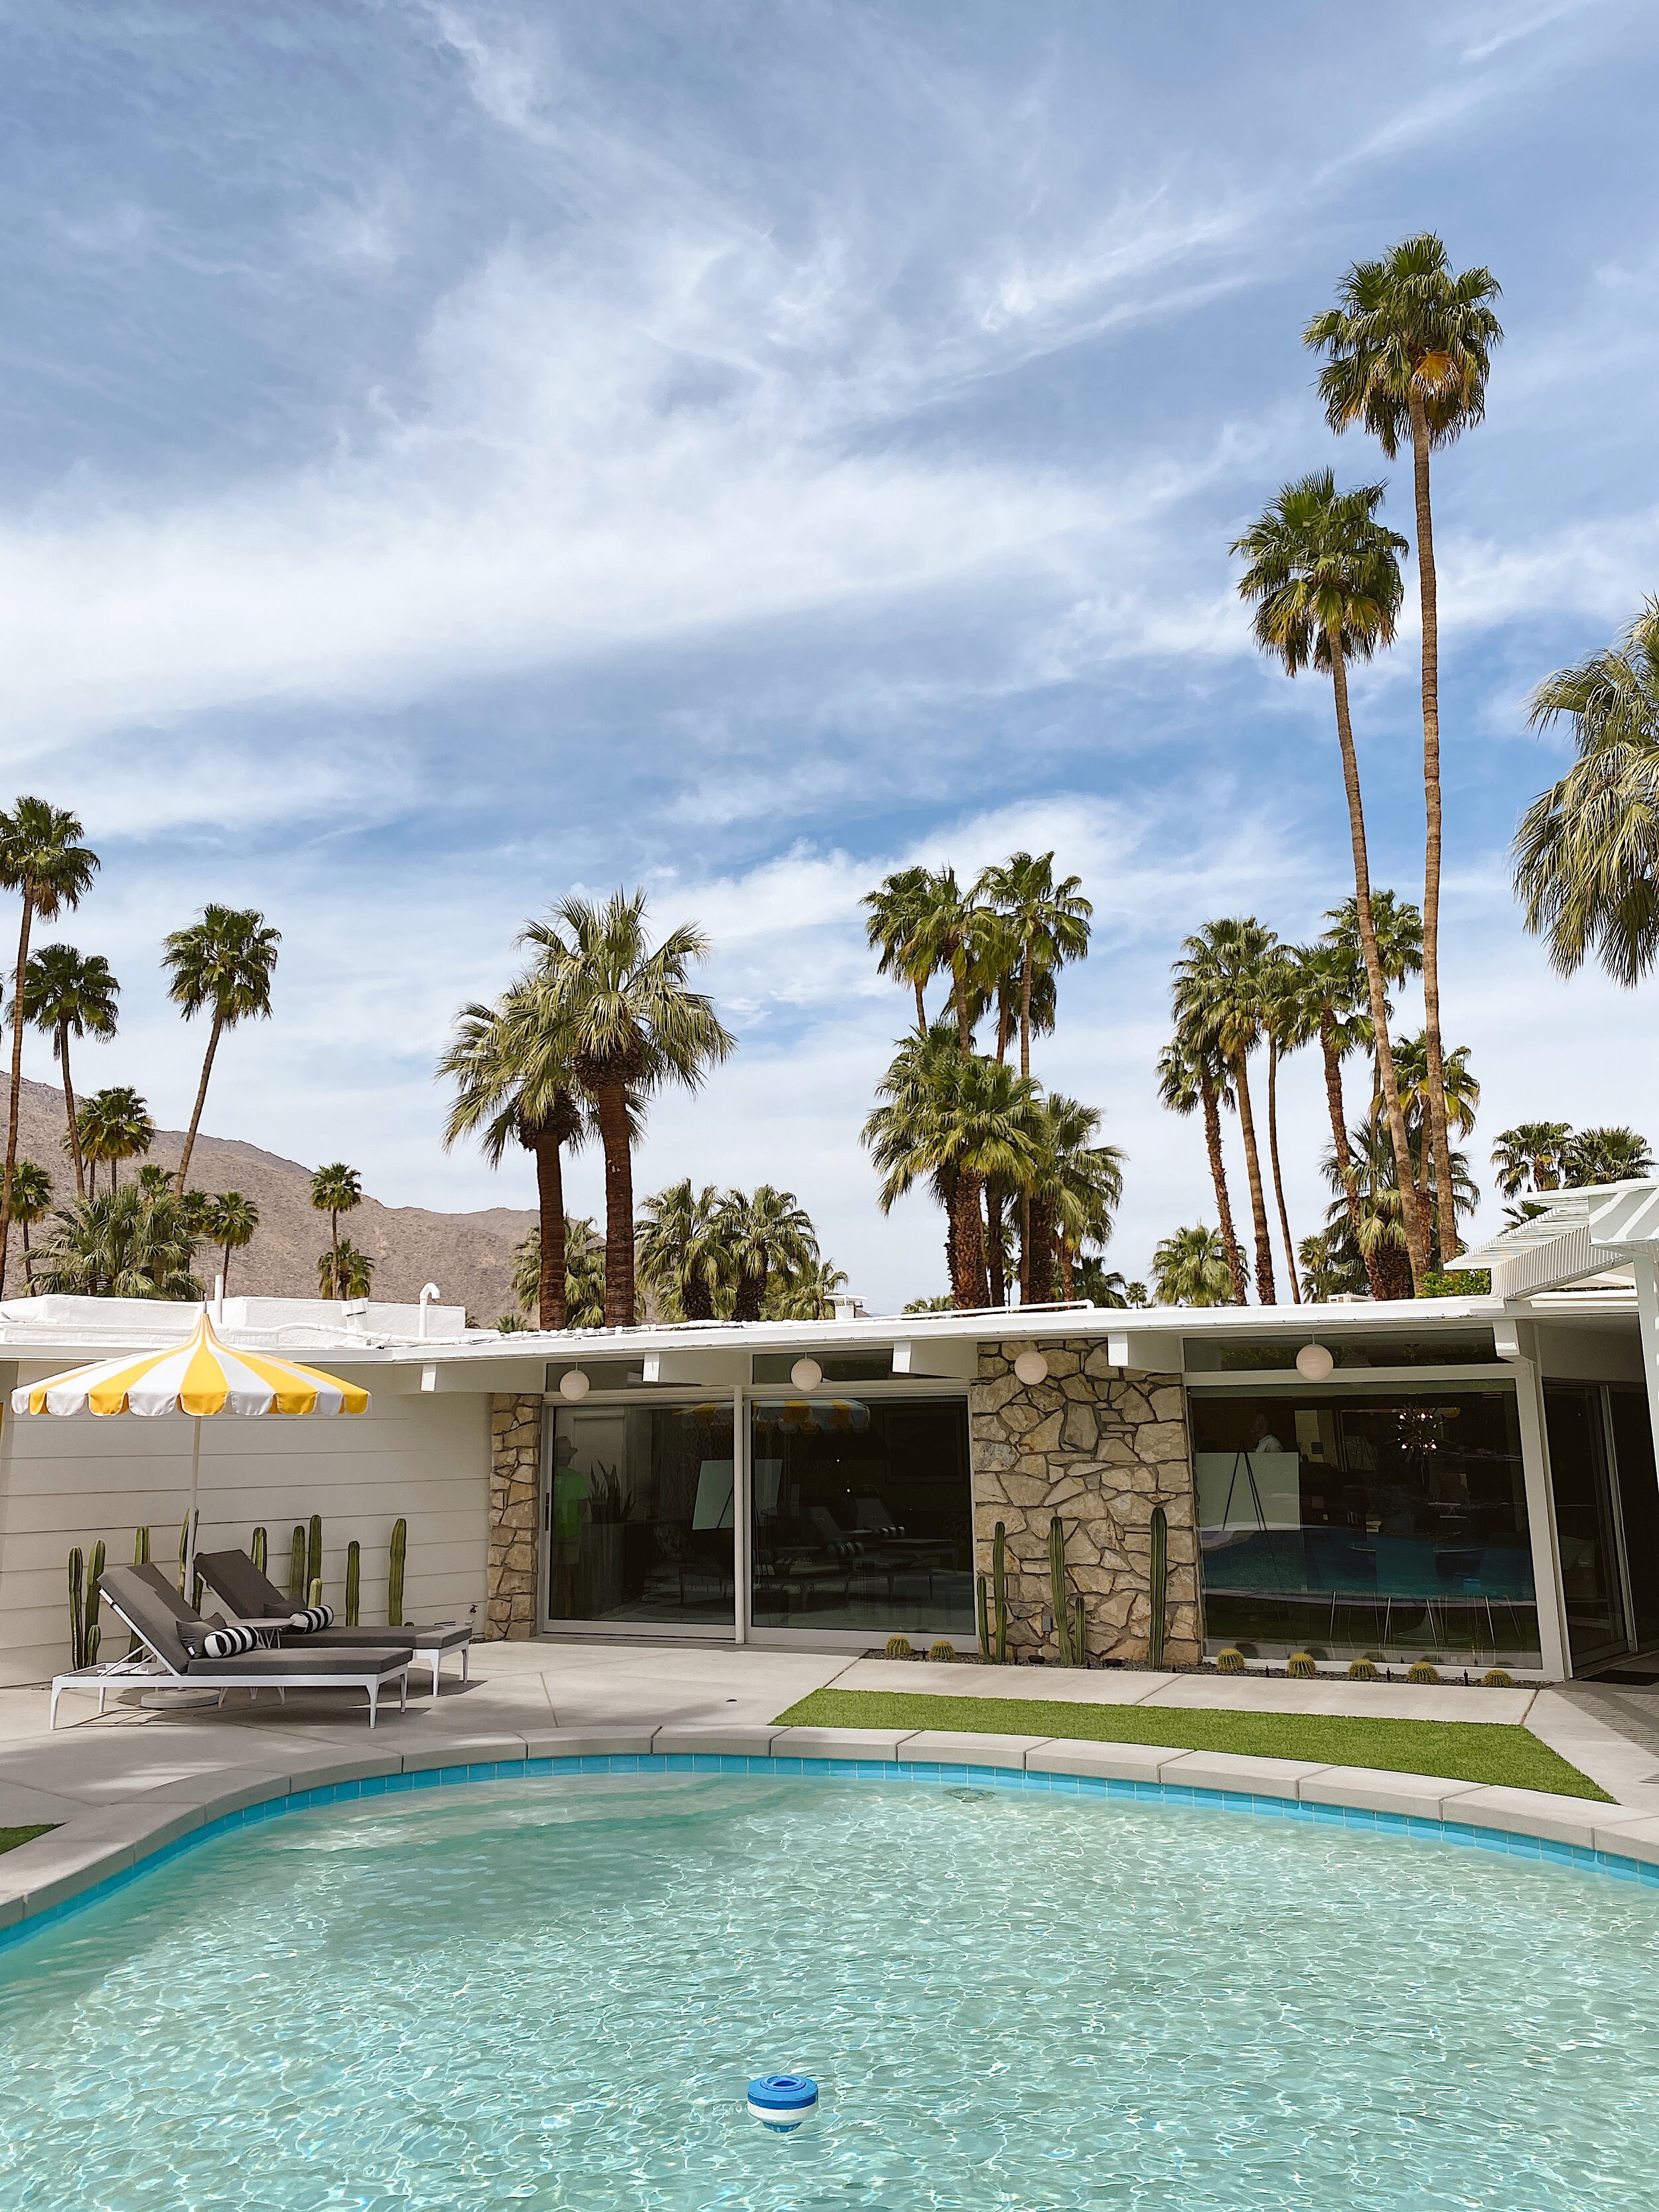 4 Days in Palm Springs: What to eat, drink and do while you're there ...